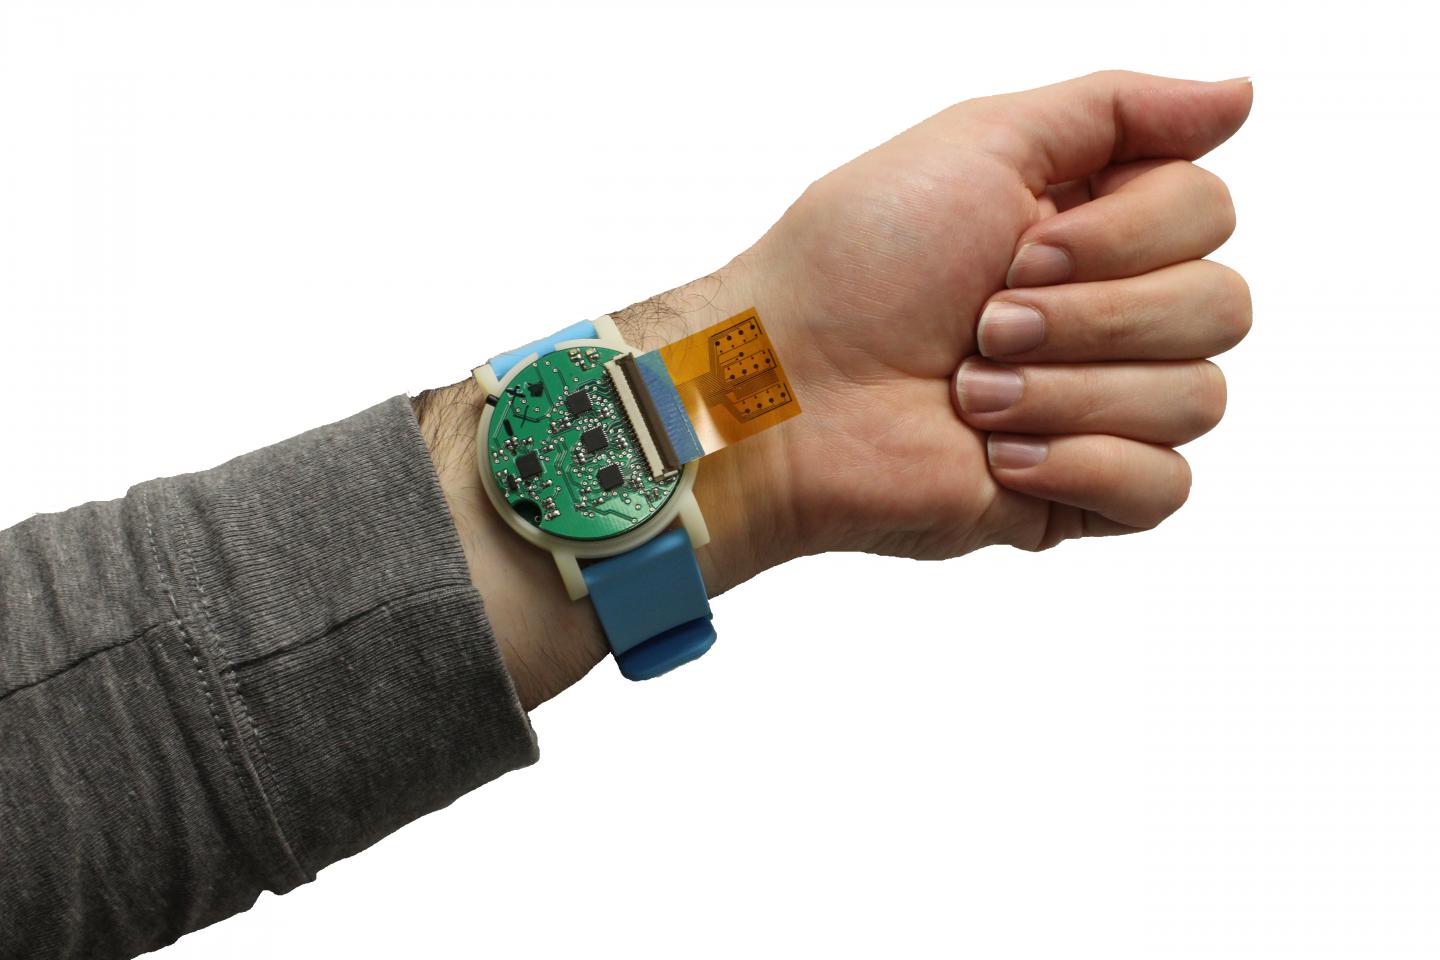 The metabolite monitoring device, shown here, is the size of a wristwatch. The sensor strip, which sticks out in this photo, can be tucked back, lying between the device and the user's skin. Source: Murat Yokus, North Carolina State University